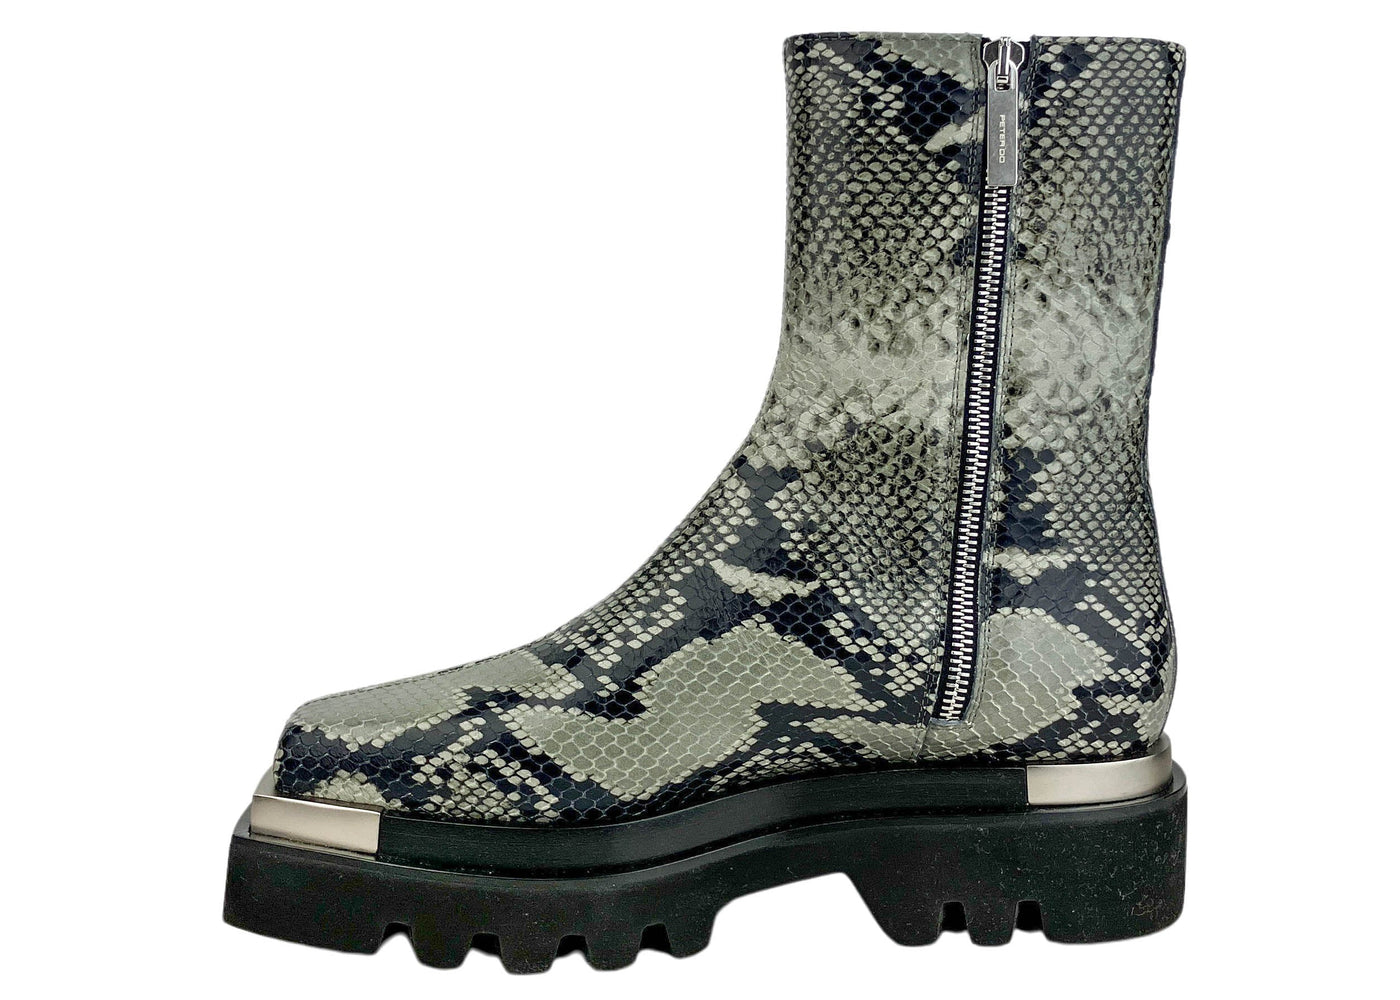 Peter Do Combat Boots in Cool Grey Python - Discounts on Peter Do at UAL